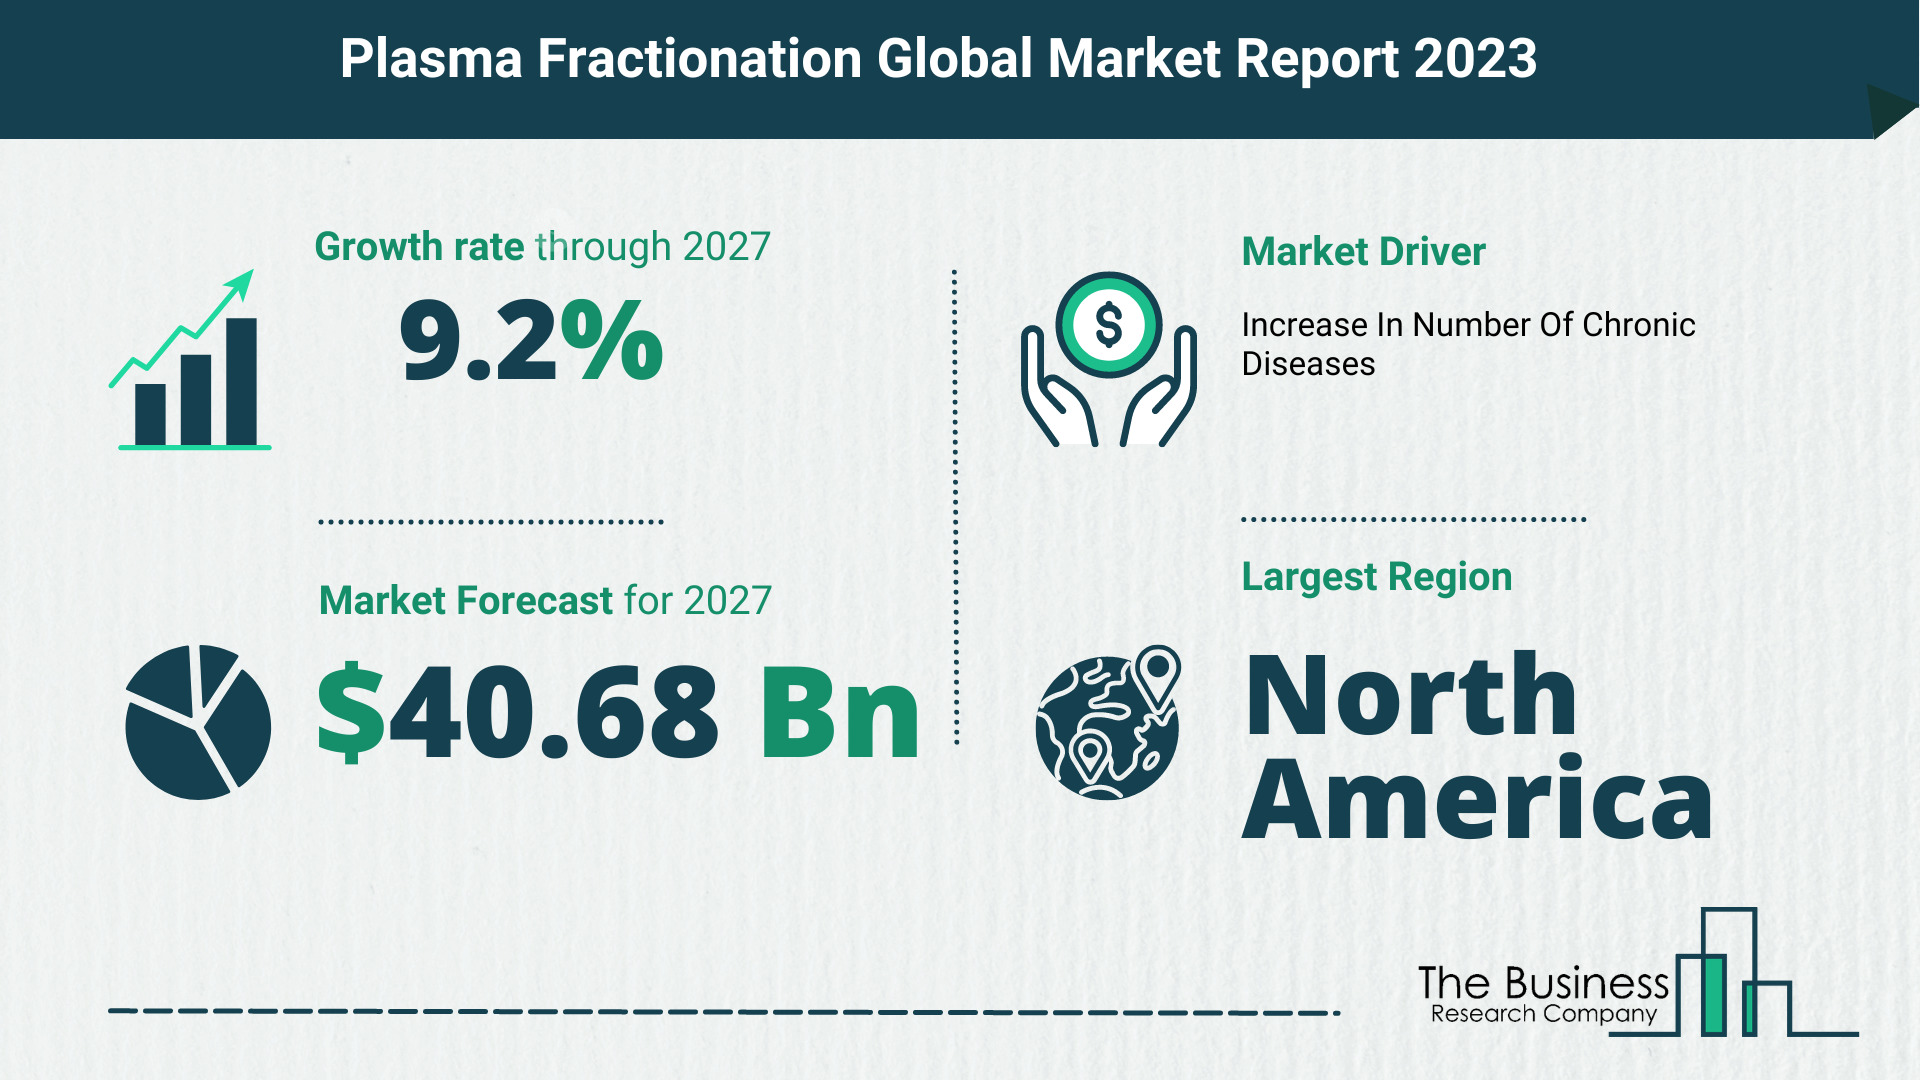 How Will The Plasma Fractionation Market Globally Expand In 2023?